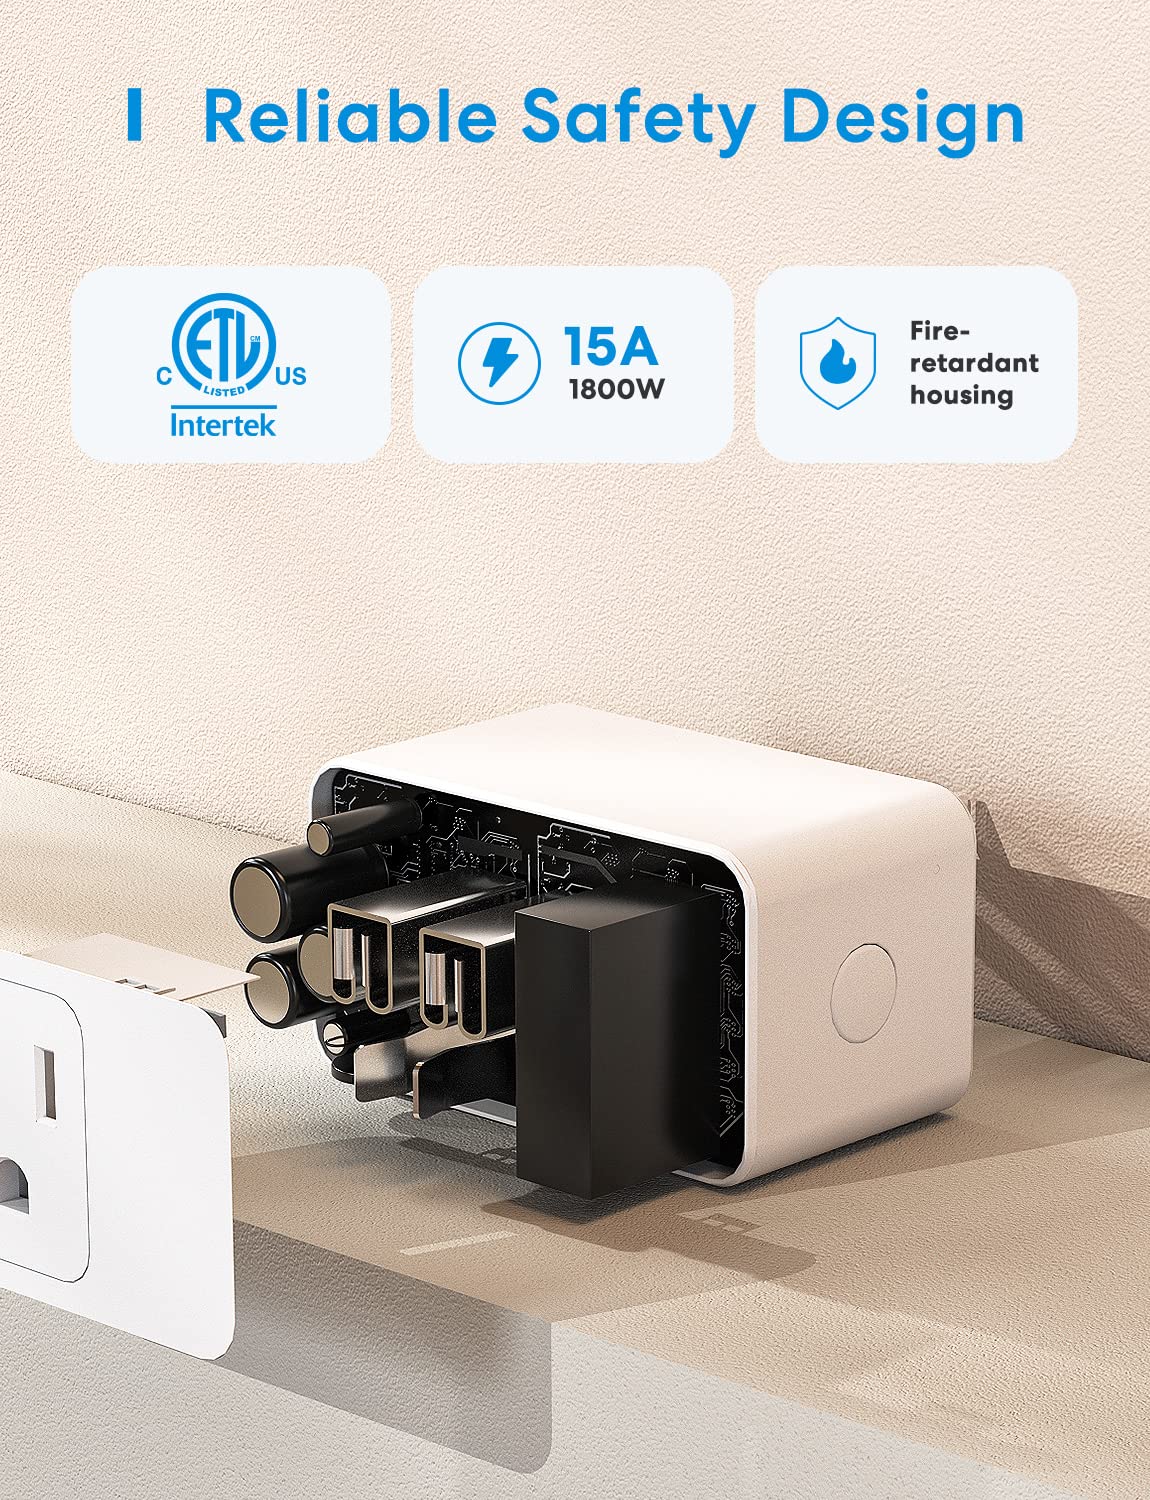 Meross Smart Plug Mini Support Apple HomeKit, Siri, Alexa, App Control, Timer, 15A & Reliable WiFi Outlet, No Hub Needed, 2.4G WiFi Only, 4 Pack